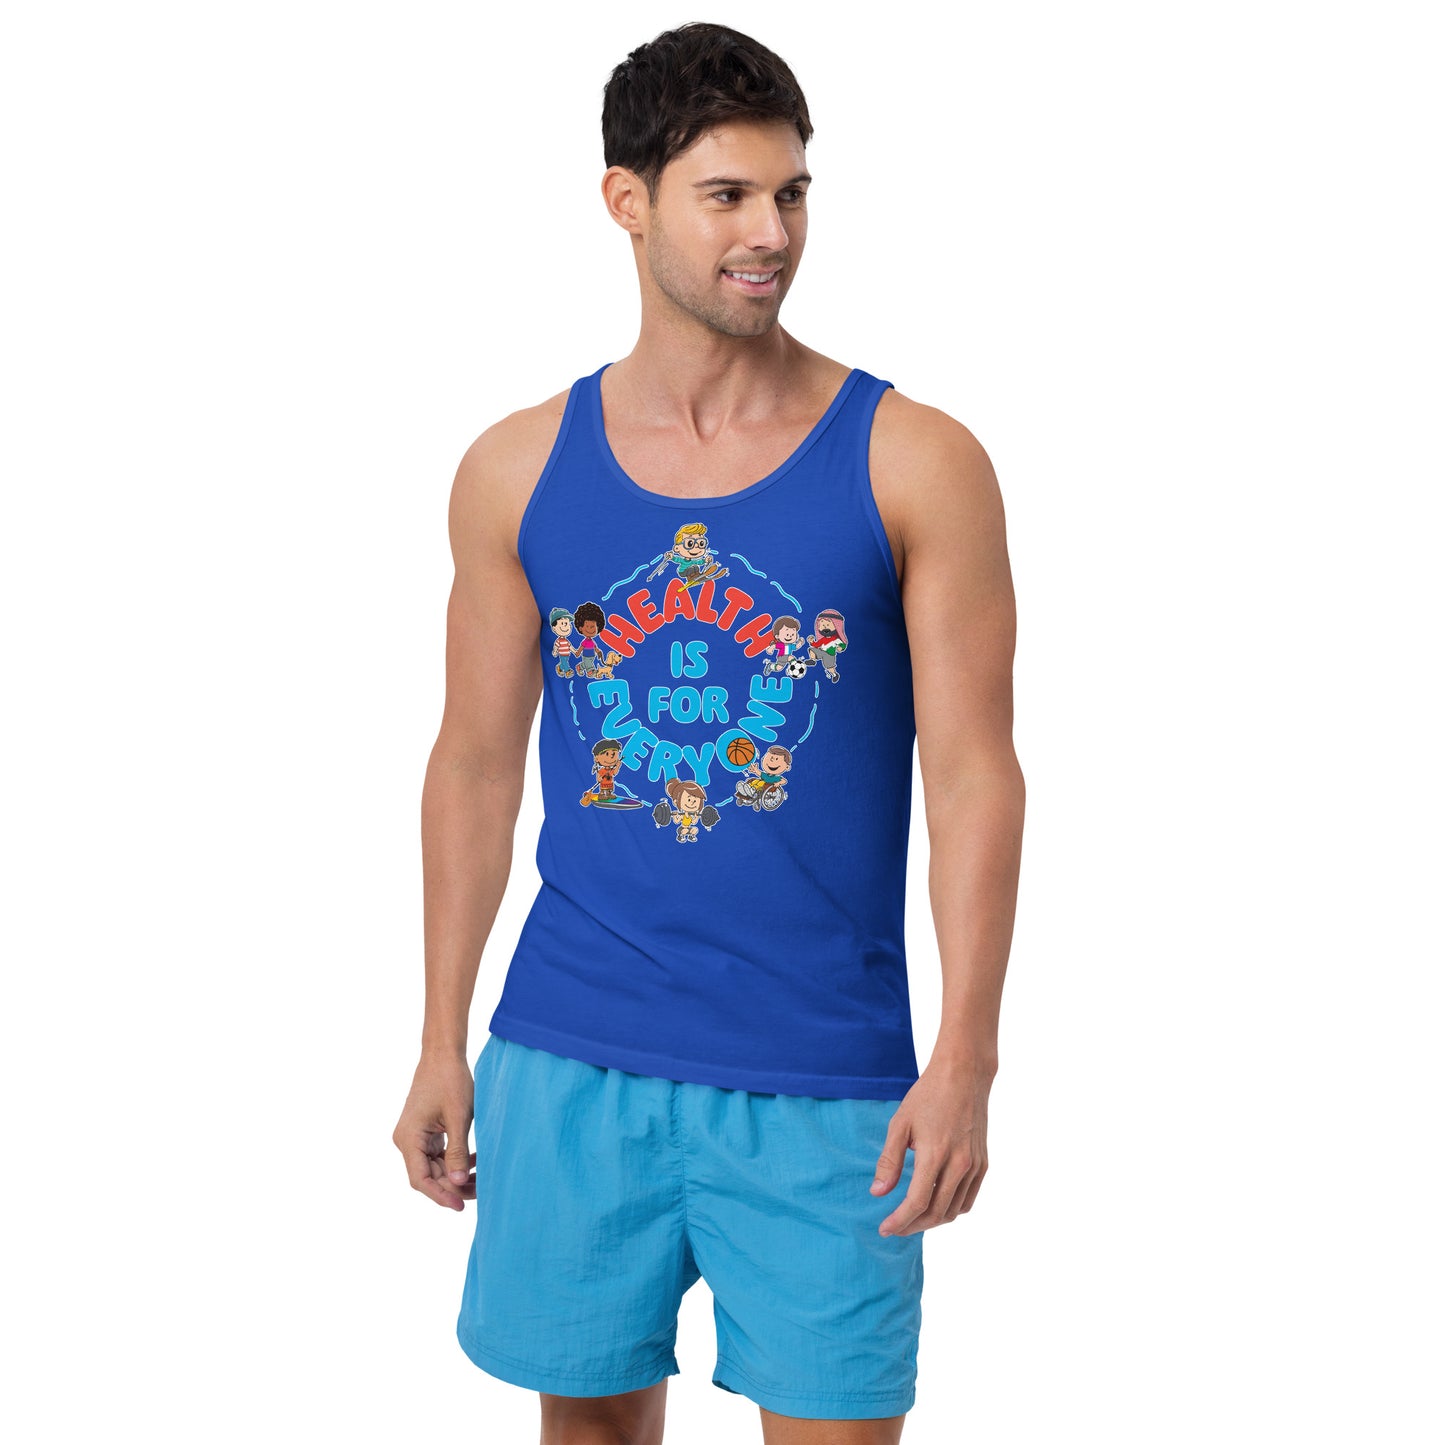 Health Is For Everyone Men's Tank Top